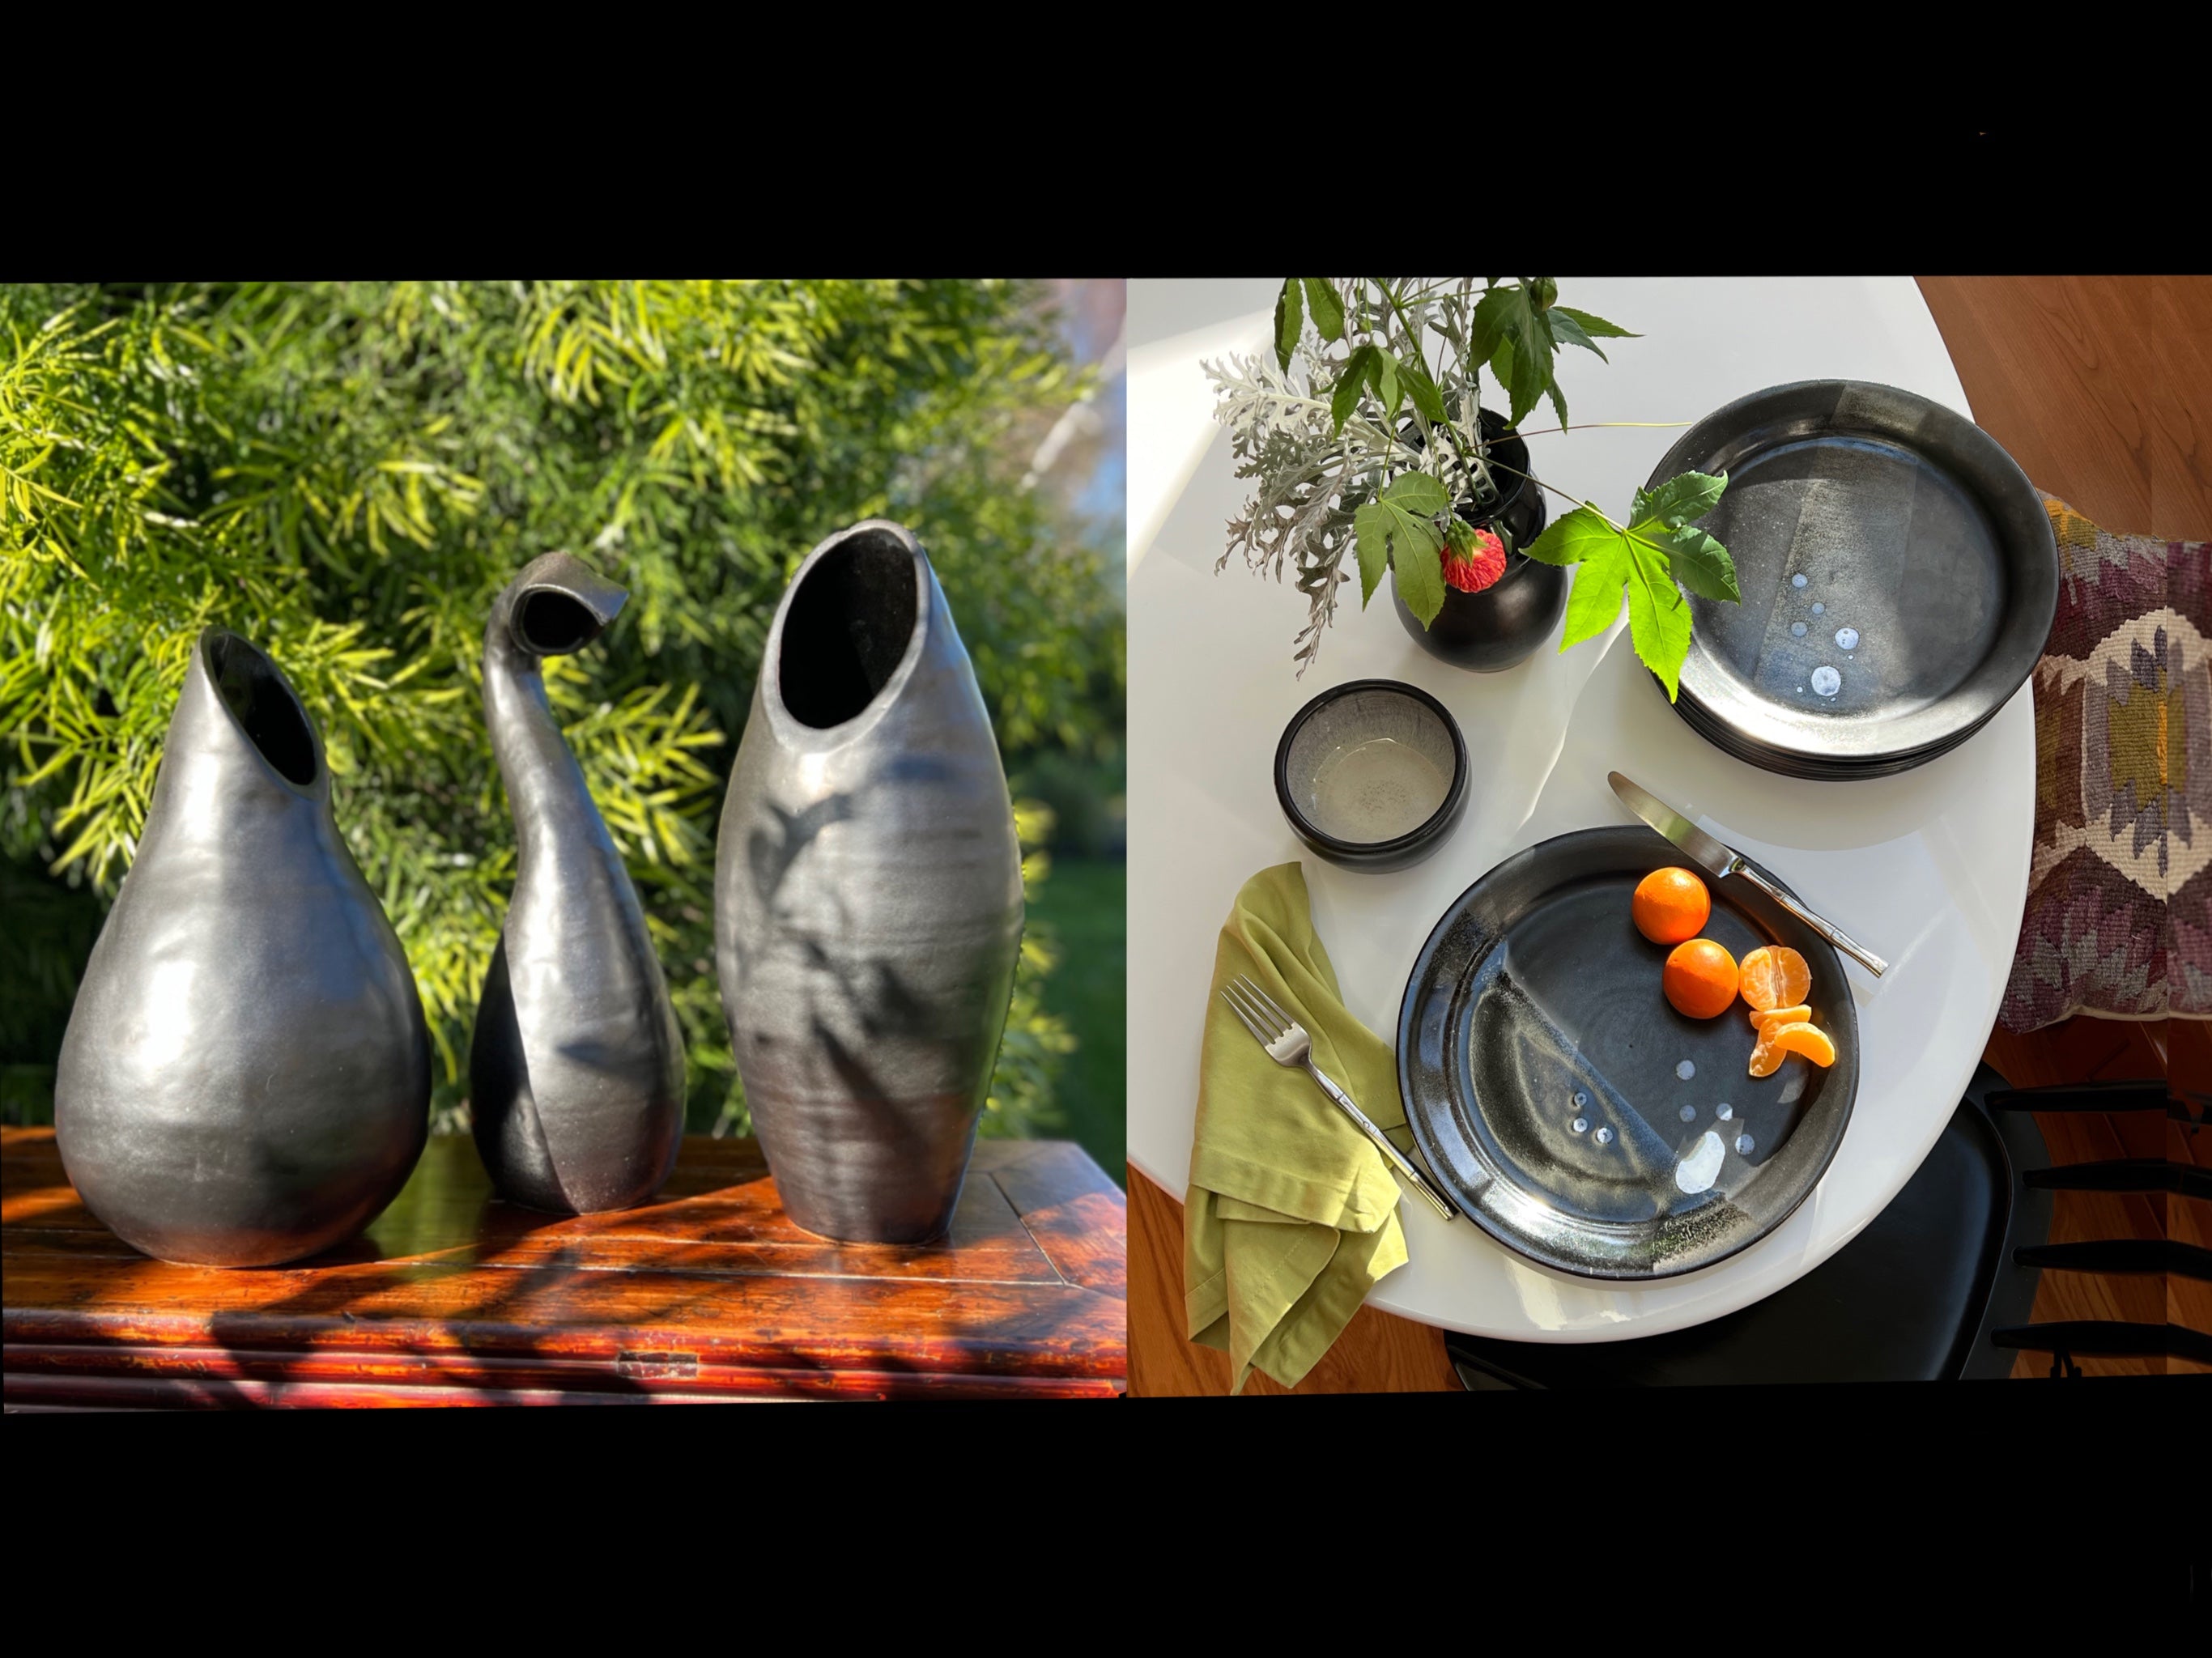 The left is a set of three large tall carved black vases. The right is a table setting, highlighting the two black ceramic plates with white splatter.